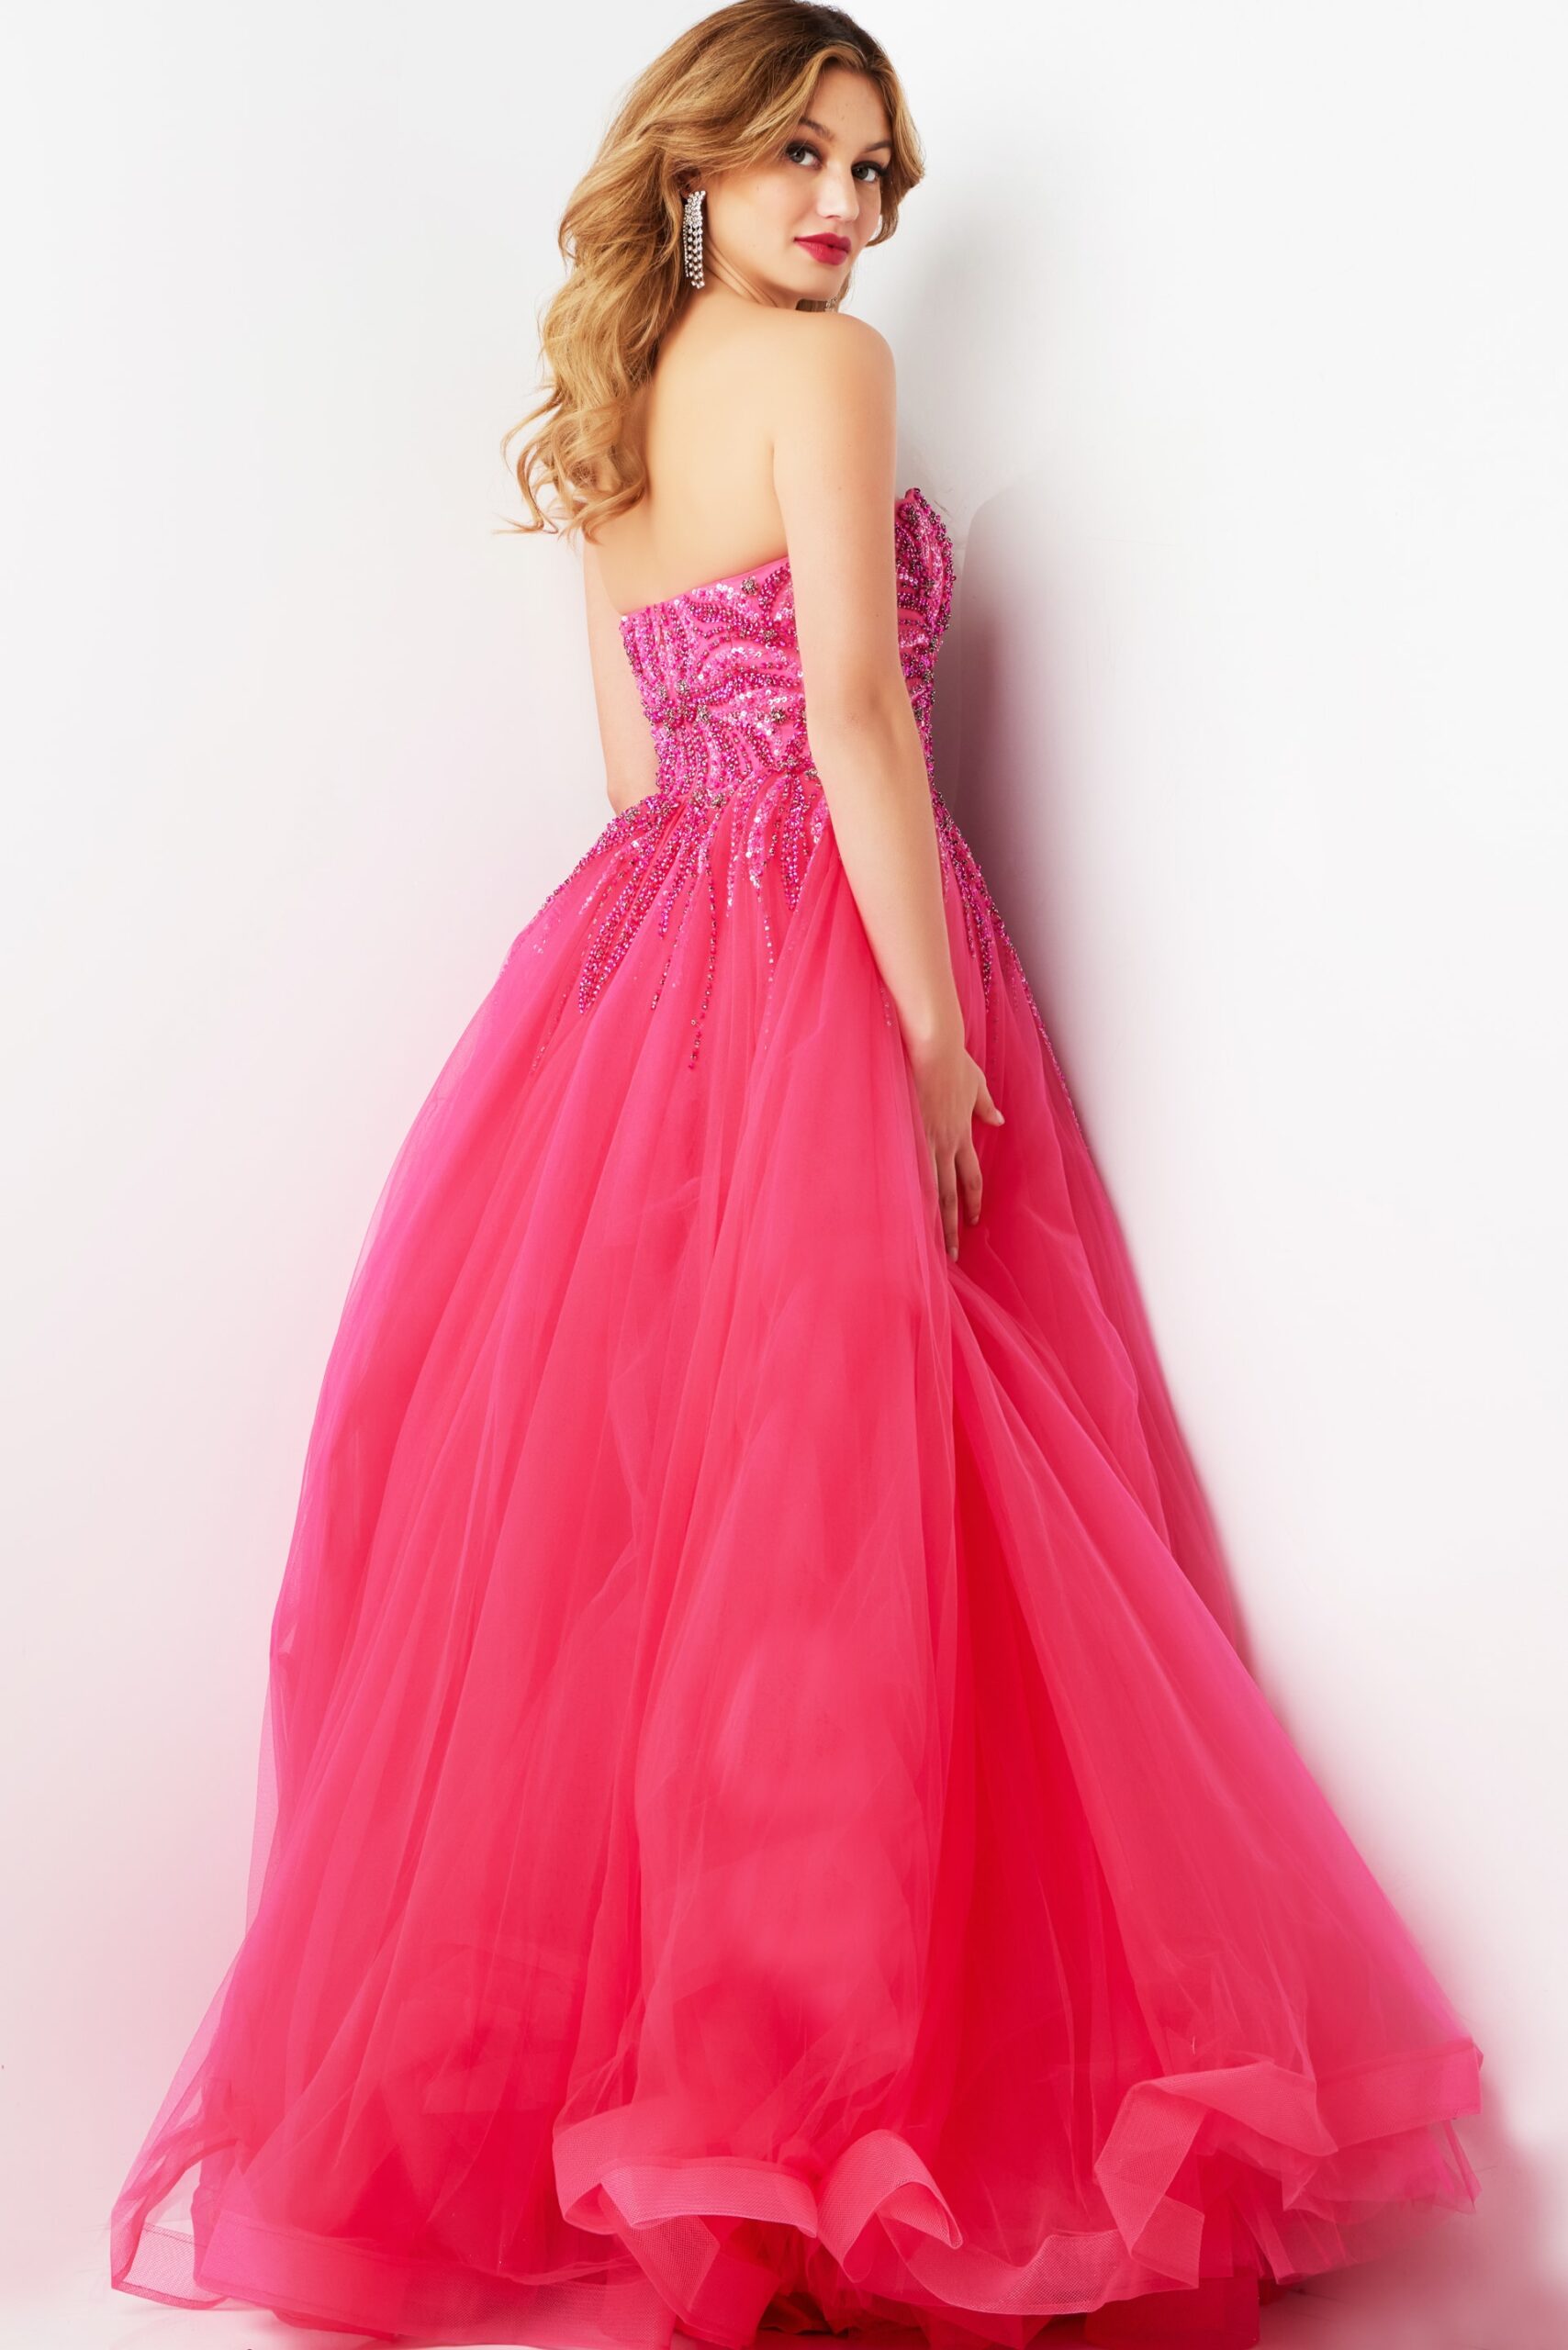 Embellished Sweetheart Neckline Prom Ball Gown 07946